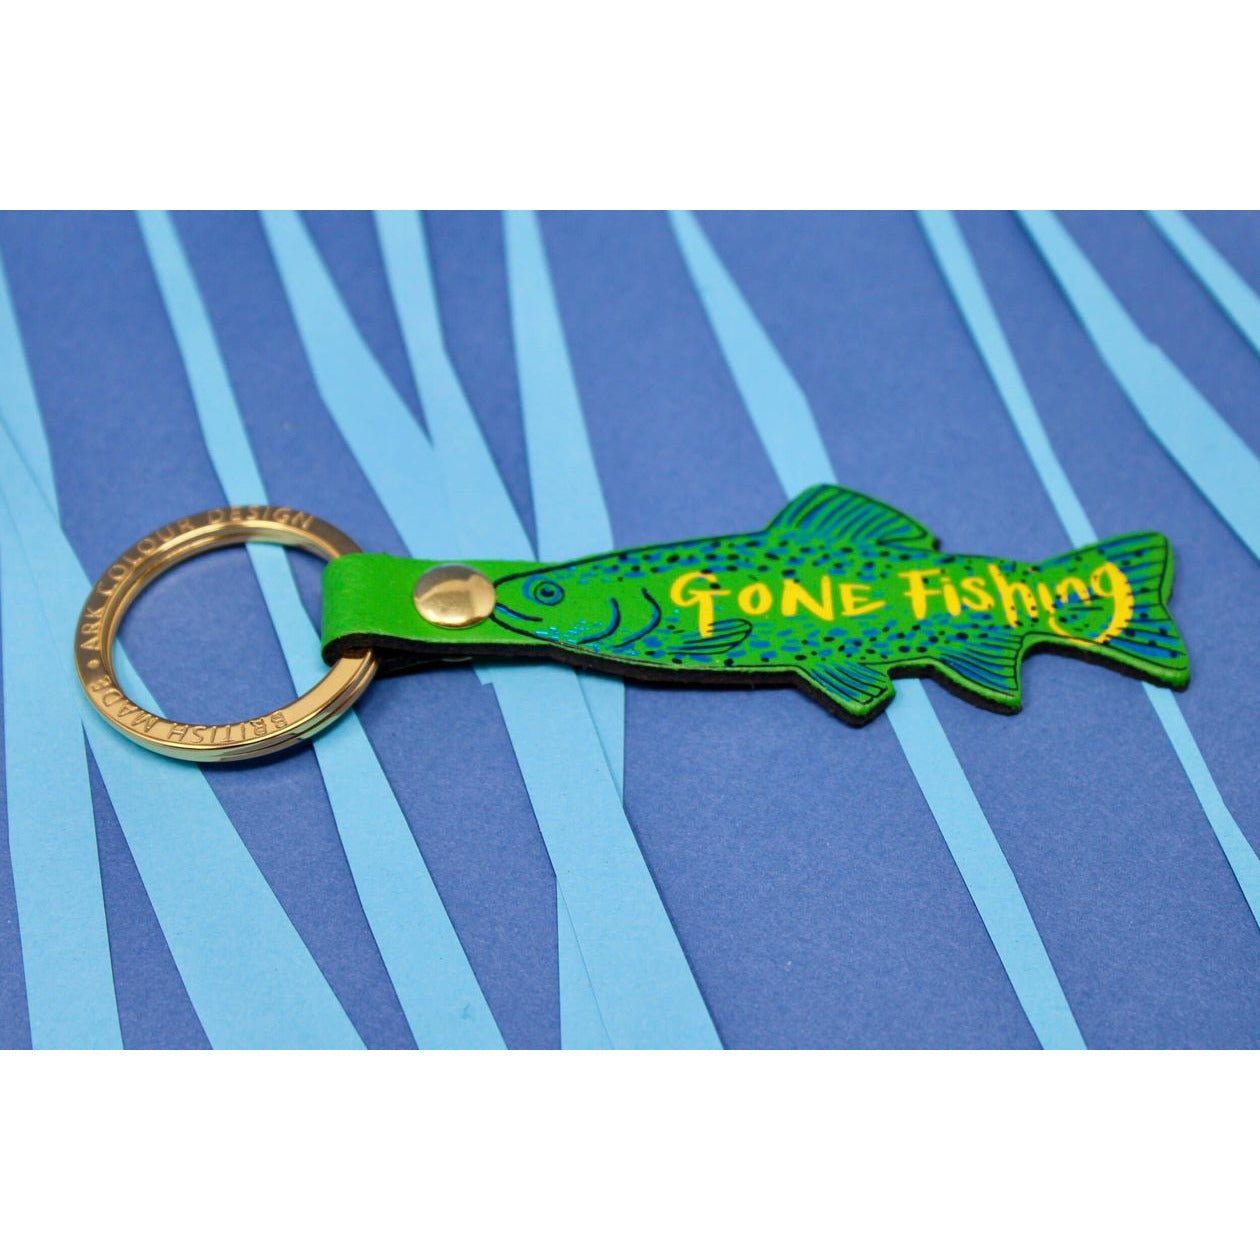 Gone Fishing Key Fob - Intrigue Ink Visit Bozeman, Unique Shopping Boutique in Montana, Work from Home Clothes for Women